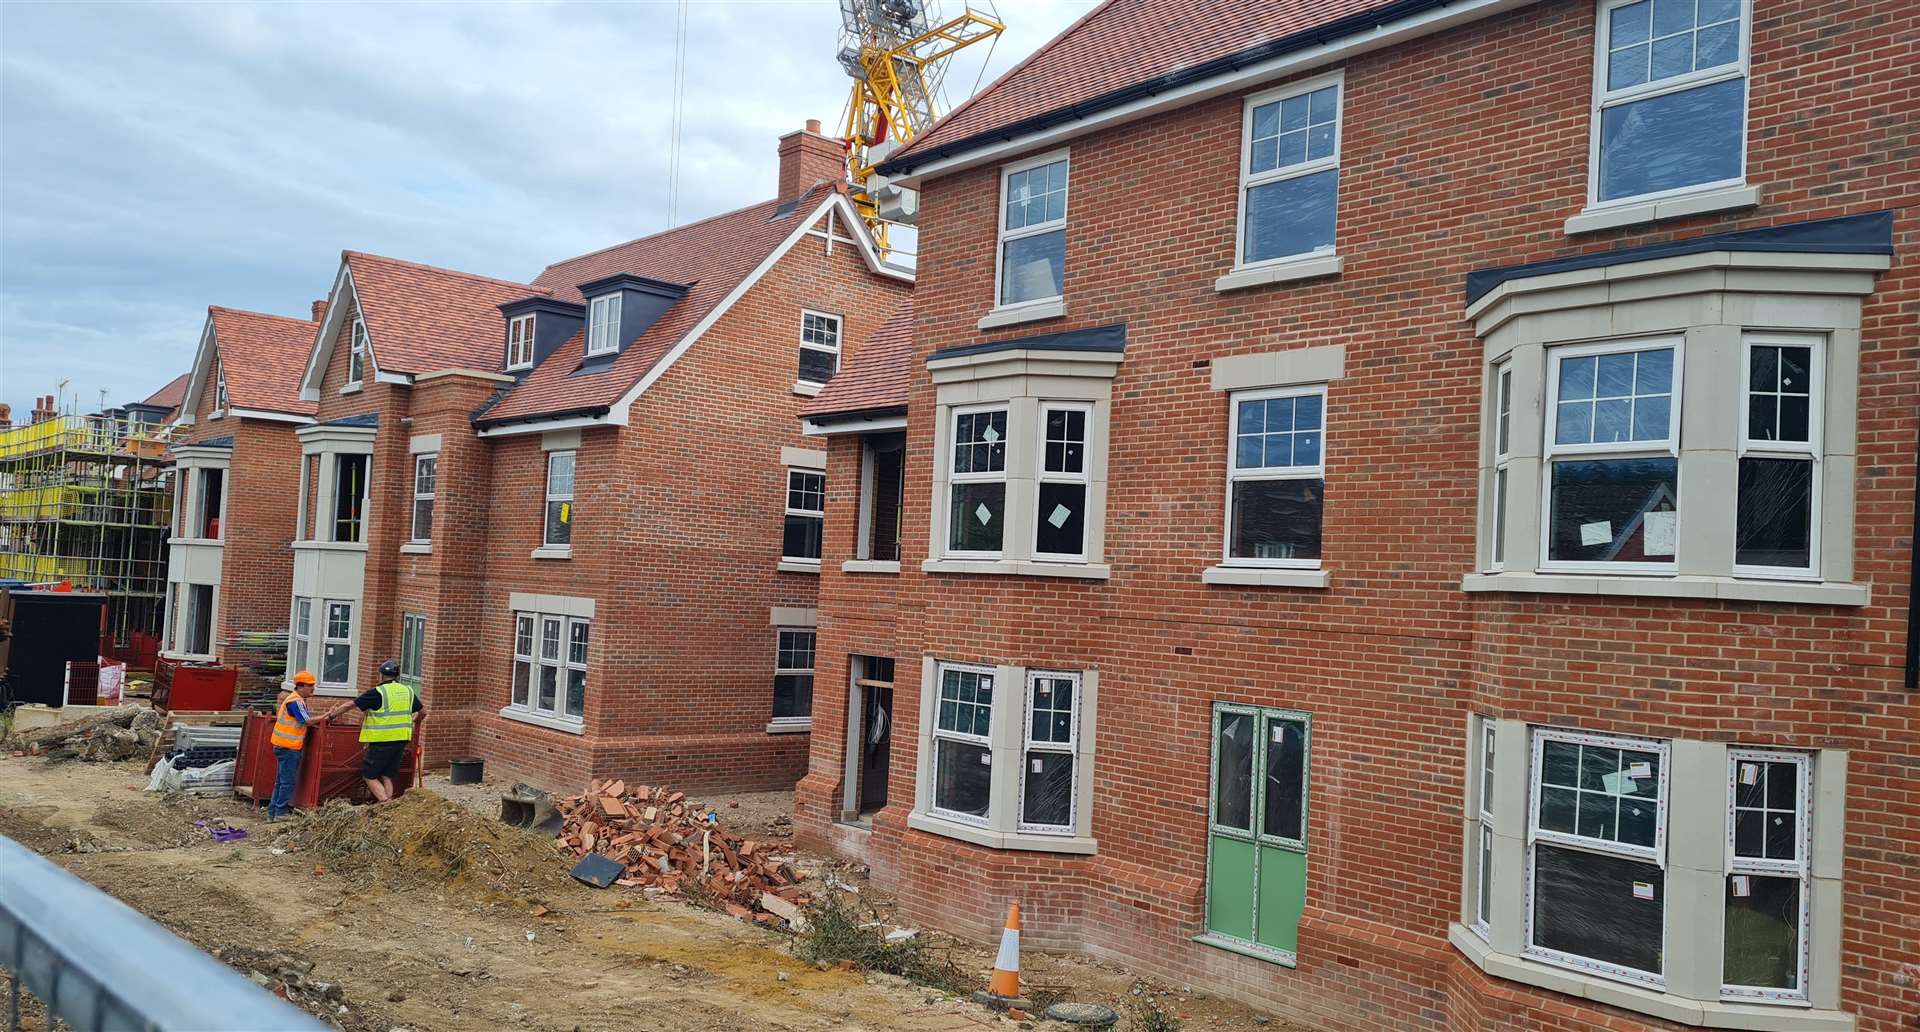 The McCarthy Stone development in New Dover Road, Canterbury, under construction